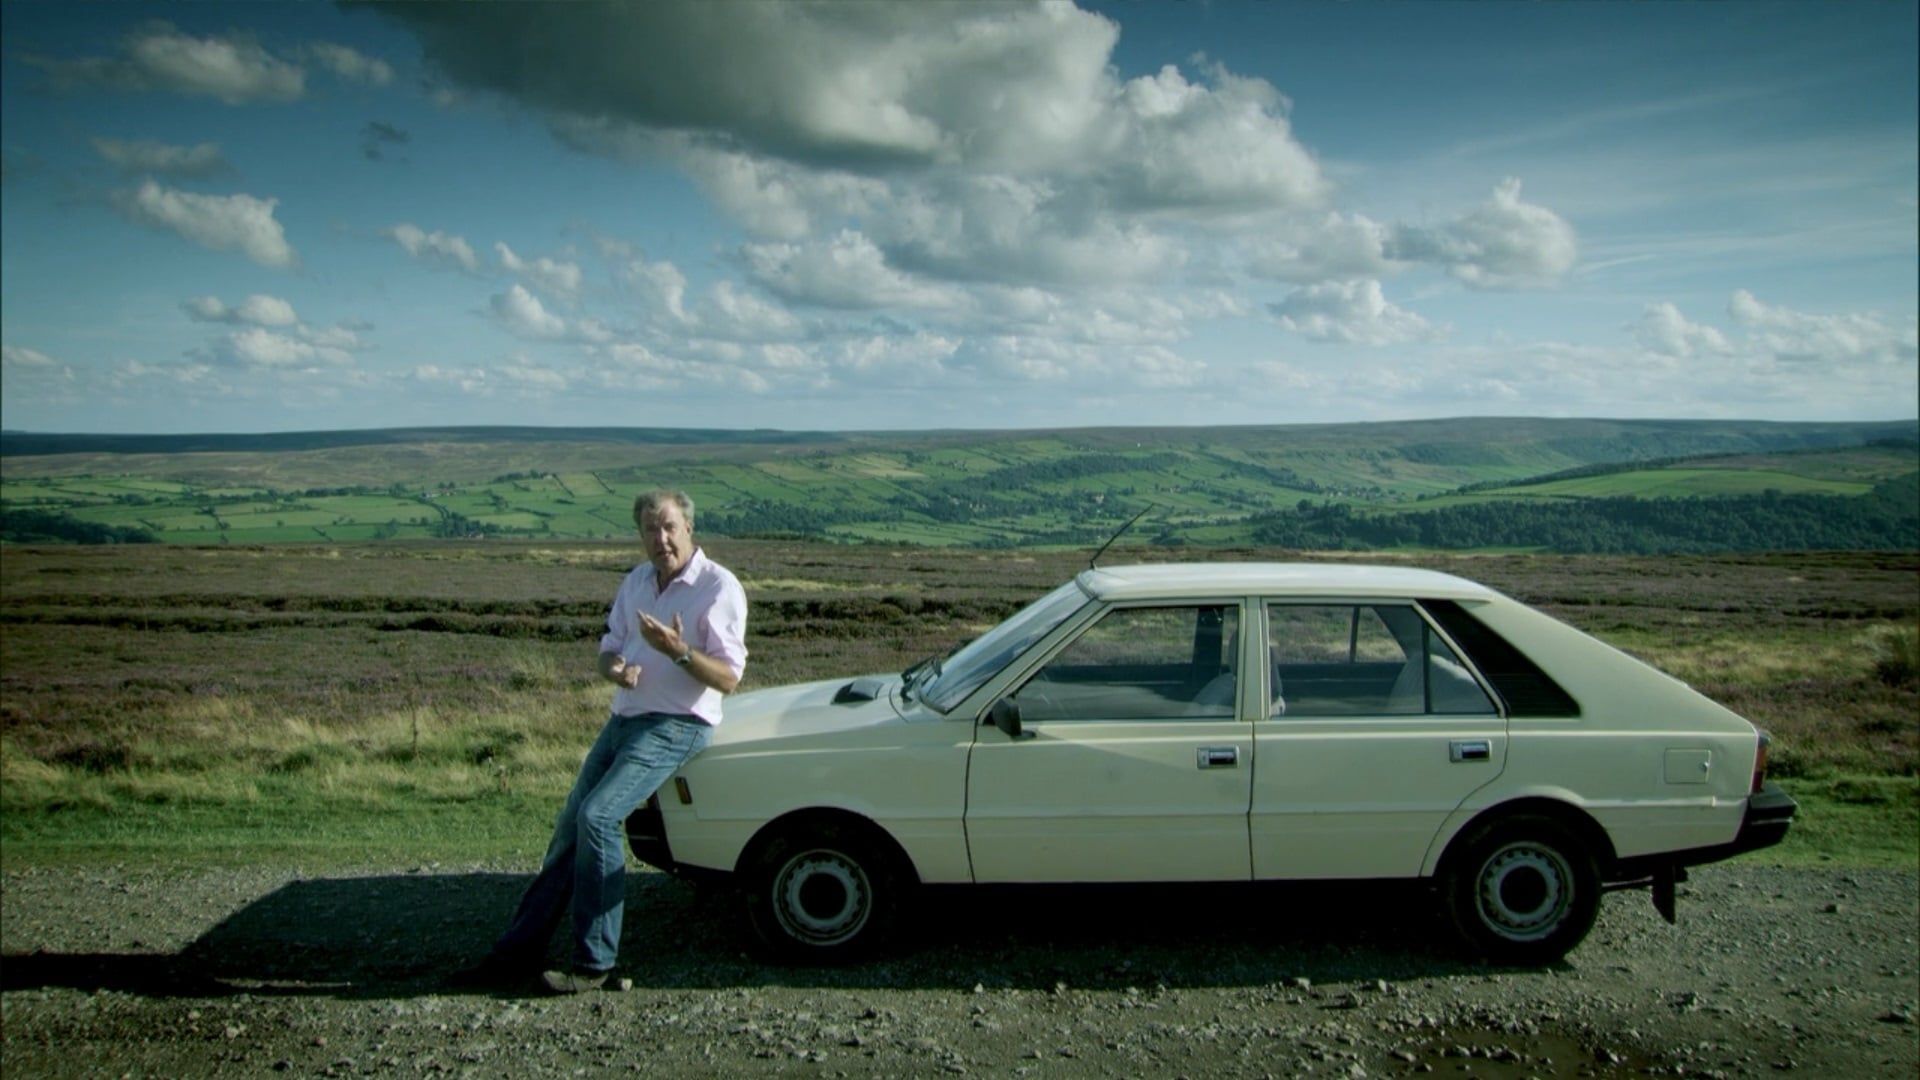 Top Gear: The Worst Car in the History of the World background